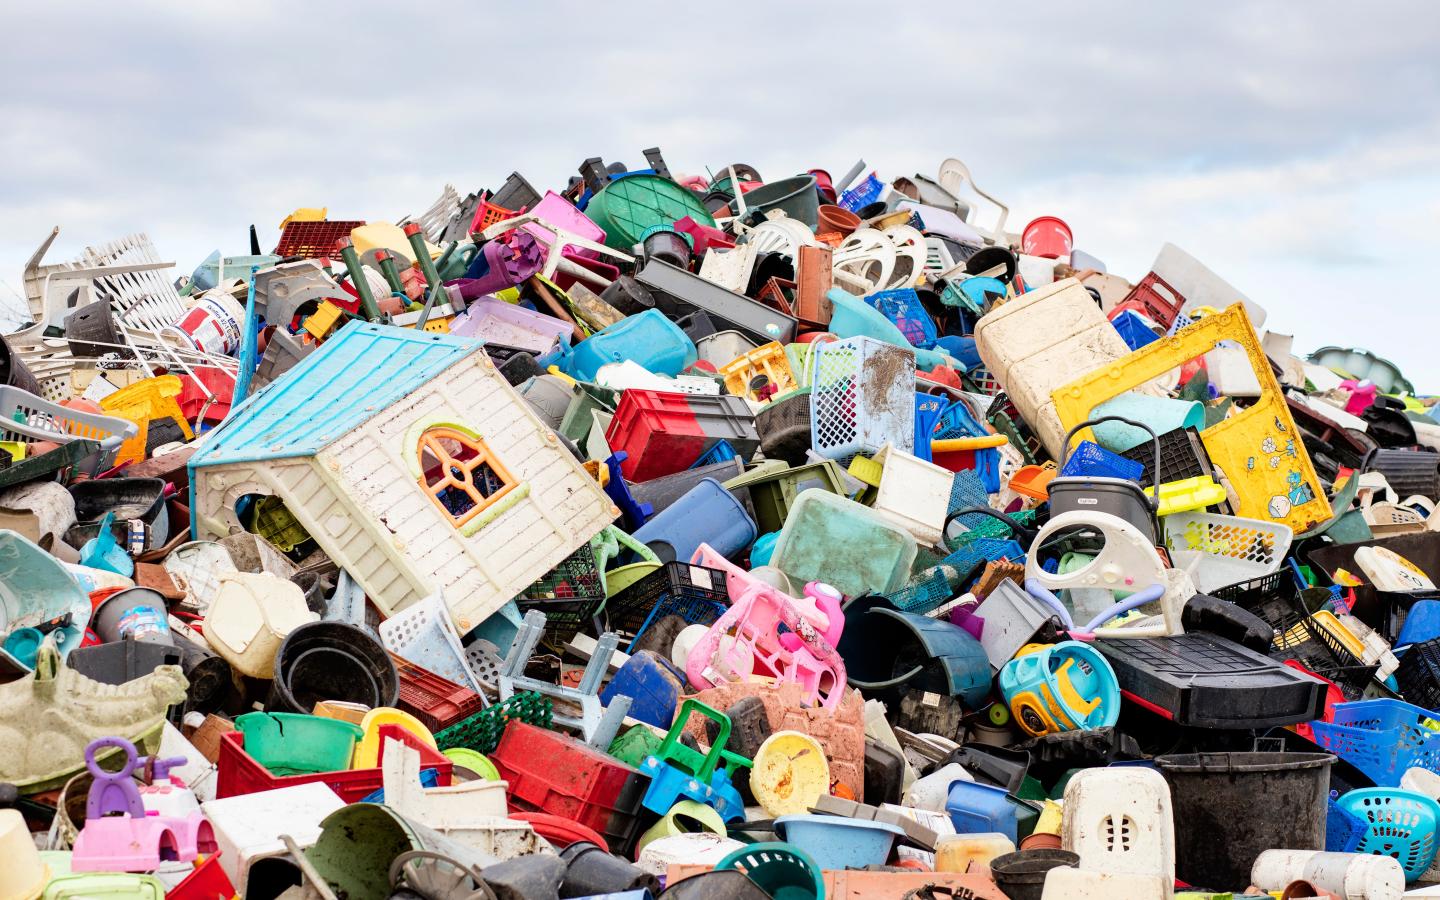 A mountainous pile of plastics — toys, doll houses, baskets and more